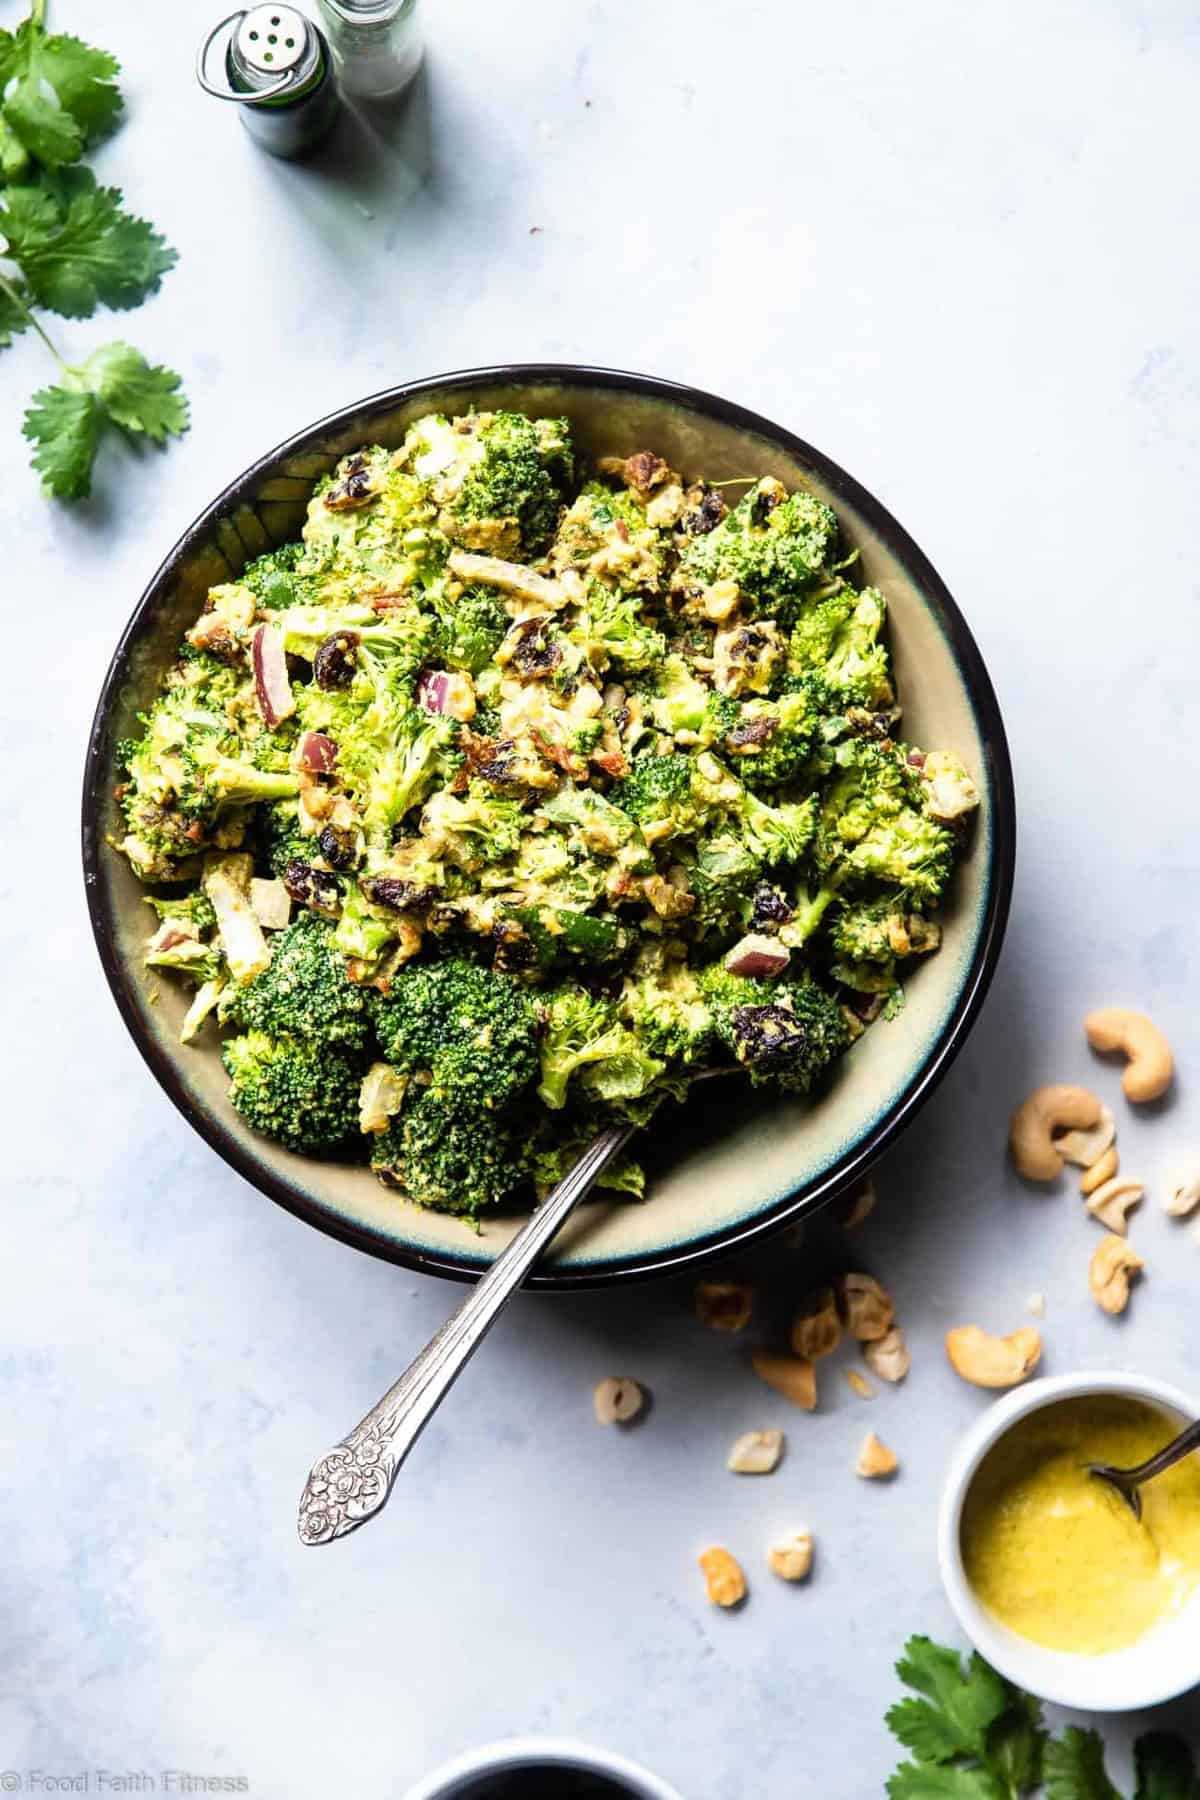 Curried Vegan Paleo Broccoli Cashew Salad -  This easy healthy broccoli salad is jazzed up with a curried cashew cream dressing. It's a quick, easy, gluten and dairy free side that's always a crowd pleaser! | #Foodfaithfitness | #Glutenfree #Paleo #Vegan #Dairyfree #Healthy